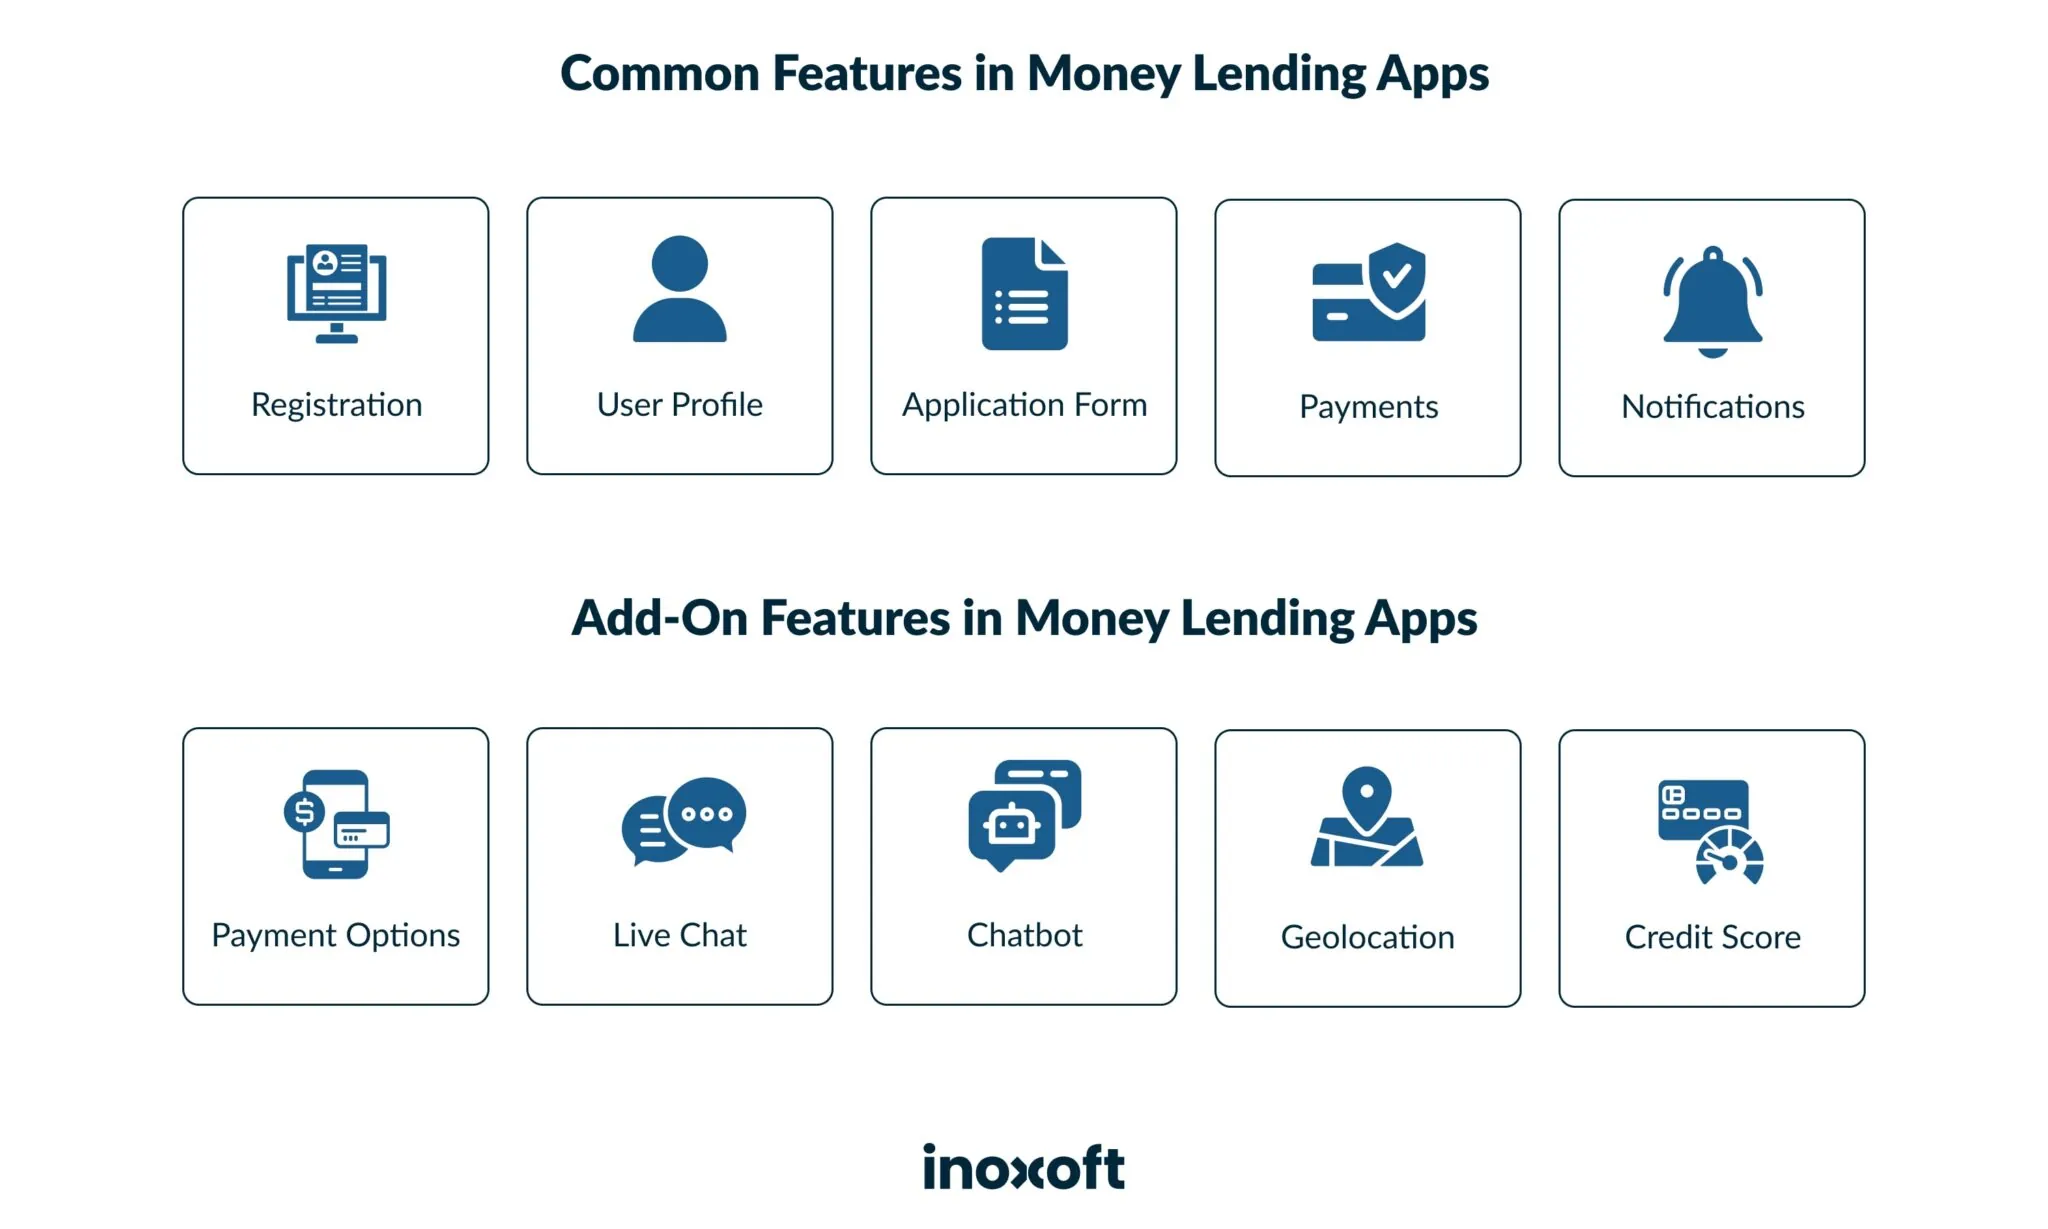 common features in money lending apps and add-on features in money lending apps